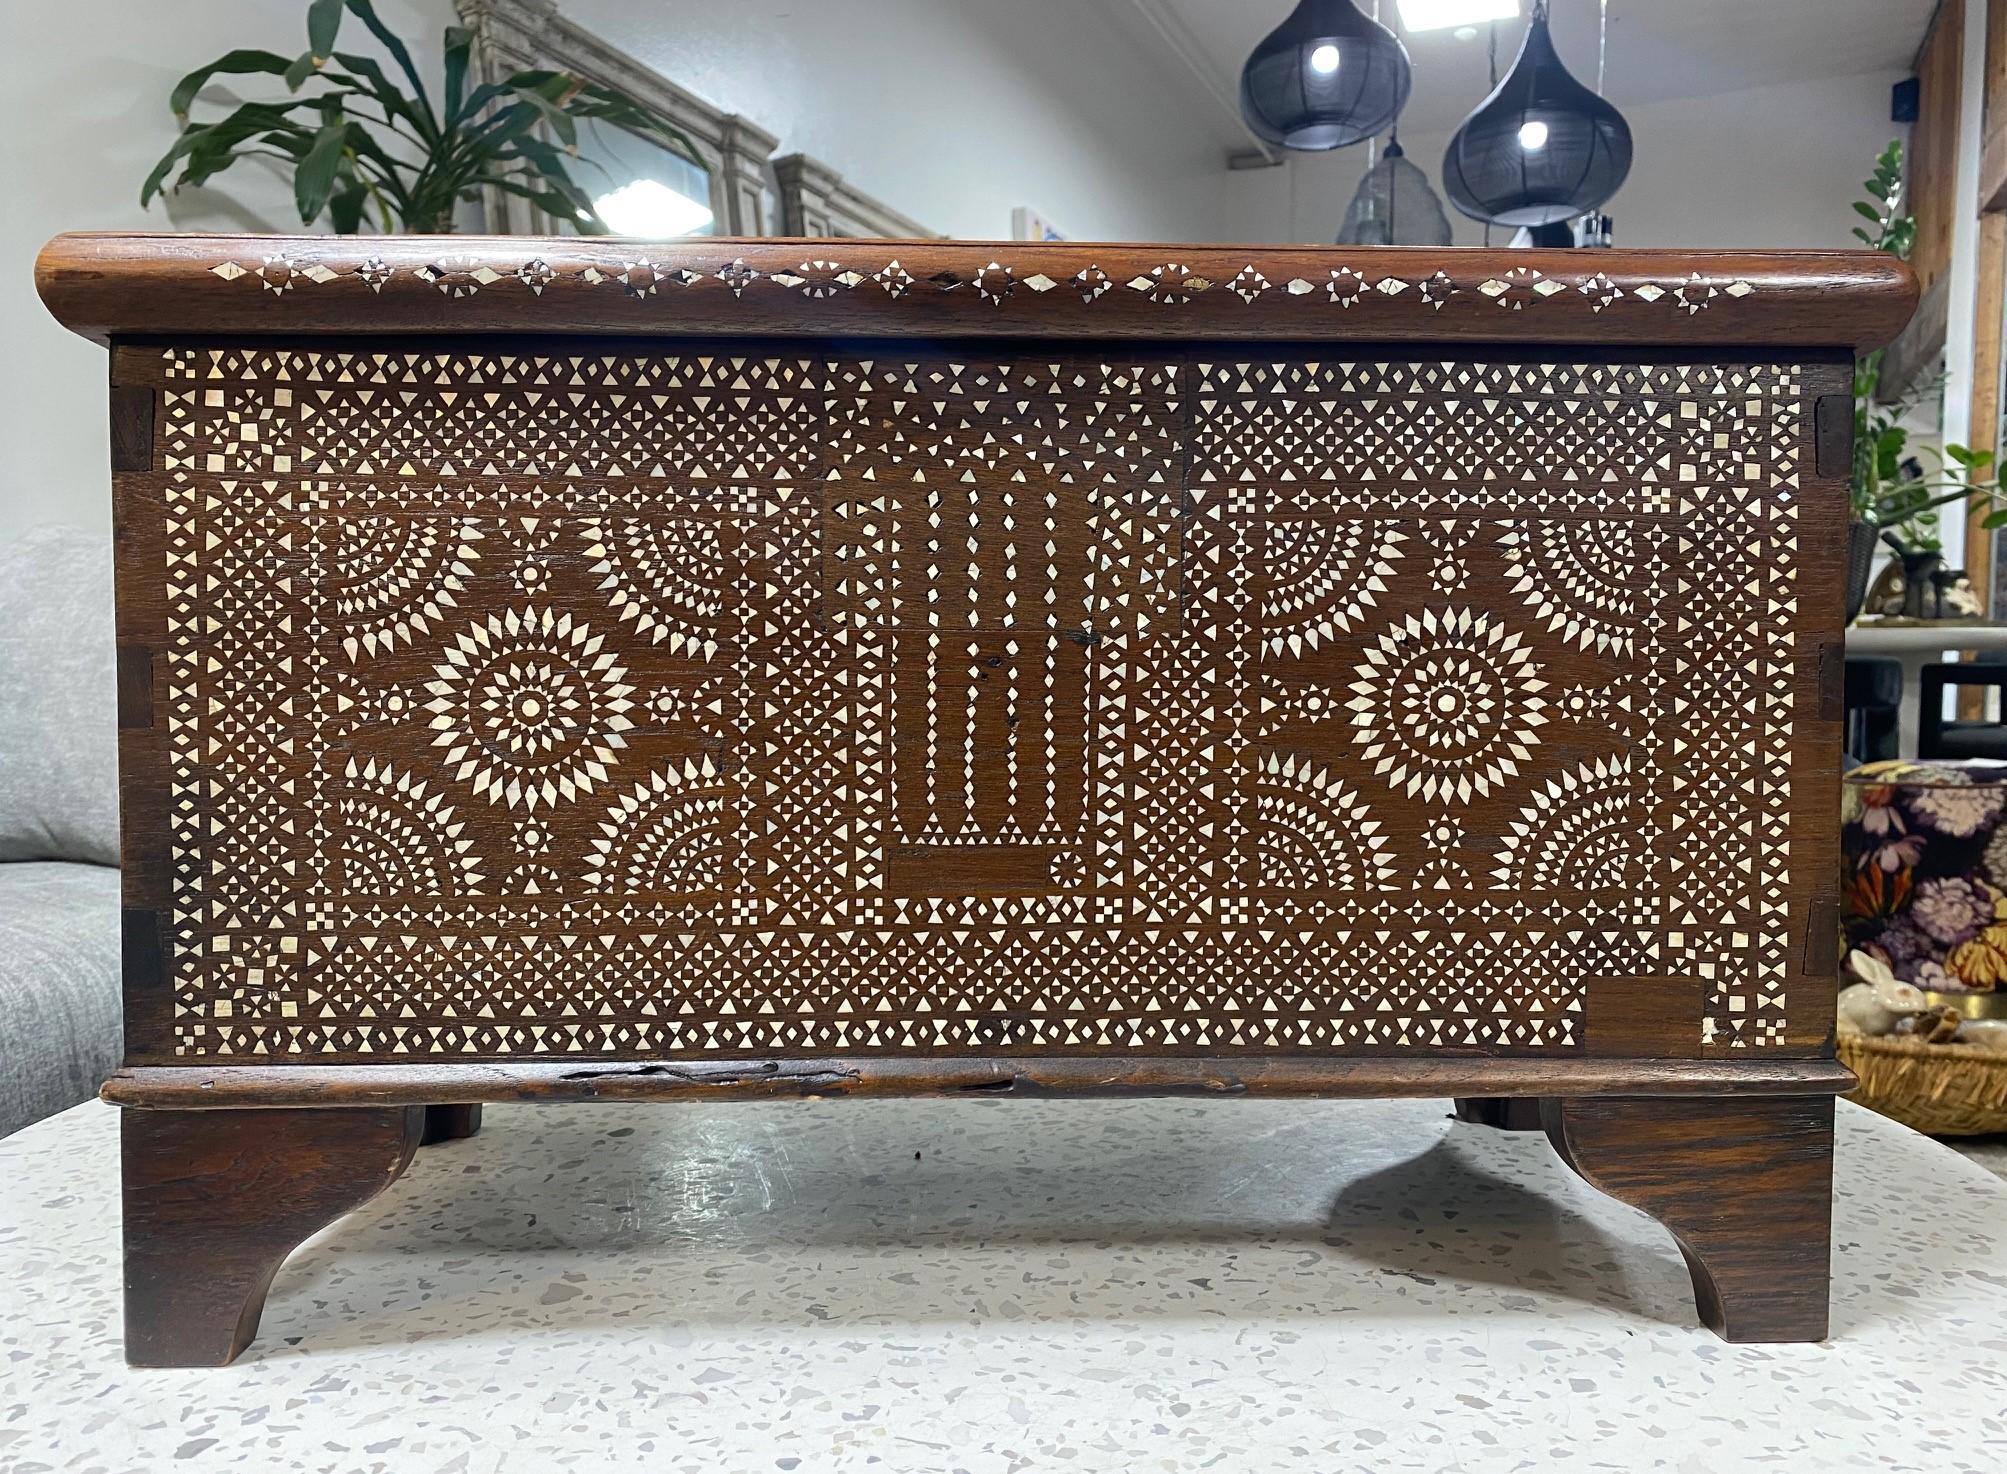 Stunning mosaic, geometric design, and gorgeous craftsmanship. This work is made of beautiful dark wood and shell and/or bone inlay. The iron handles are also a nice touch. A genuine work of art.

A very eye-catching and unique piece. Would clearly